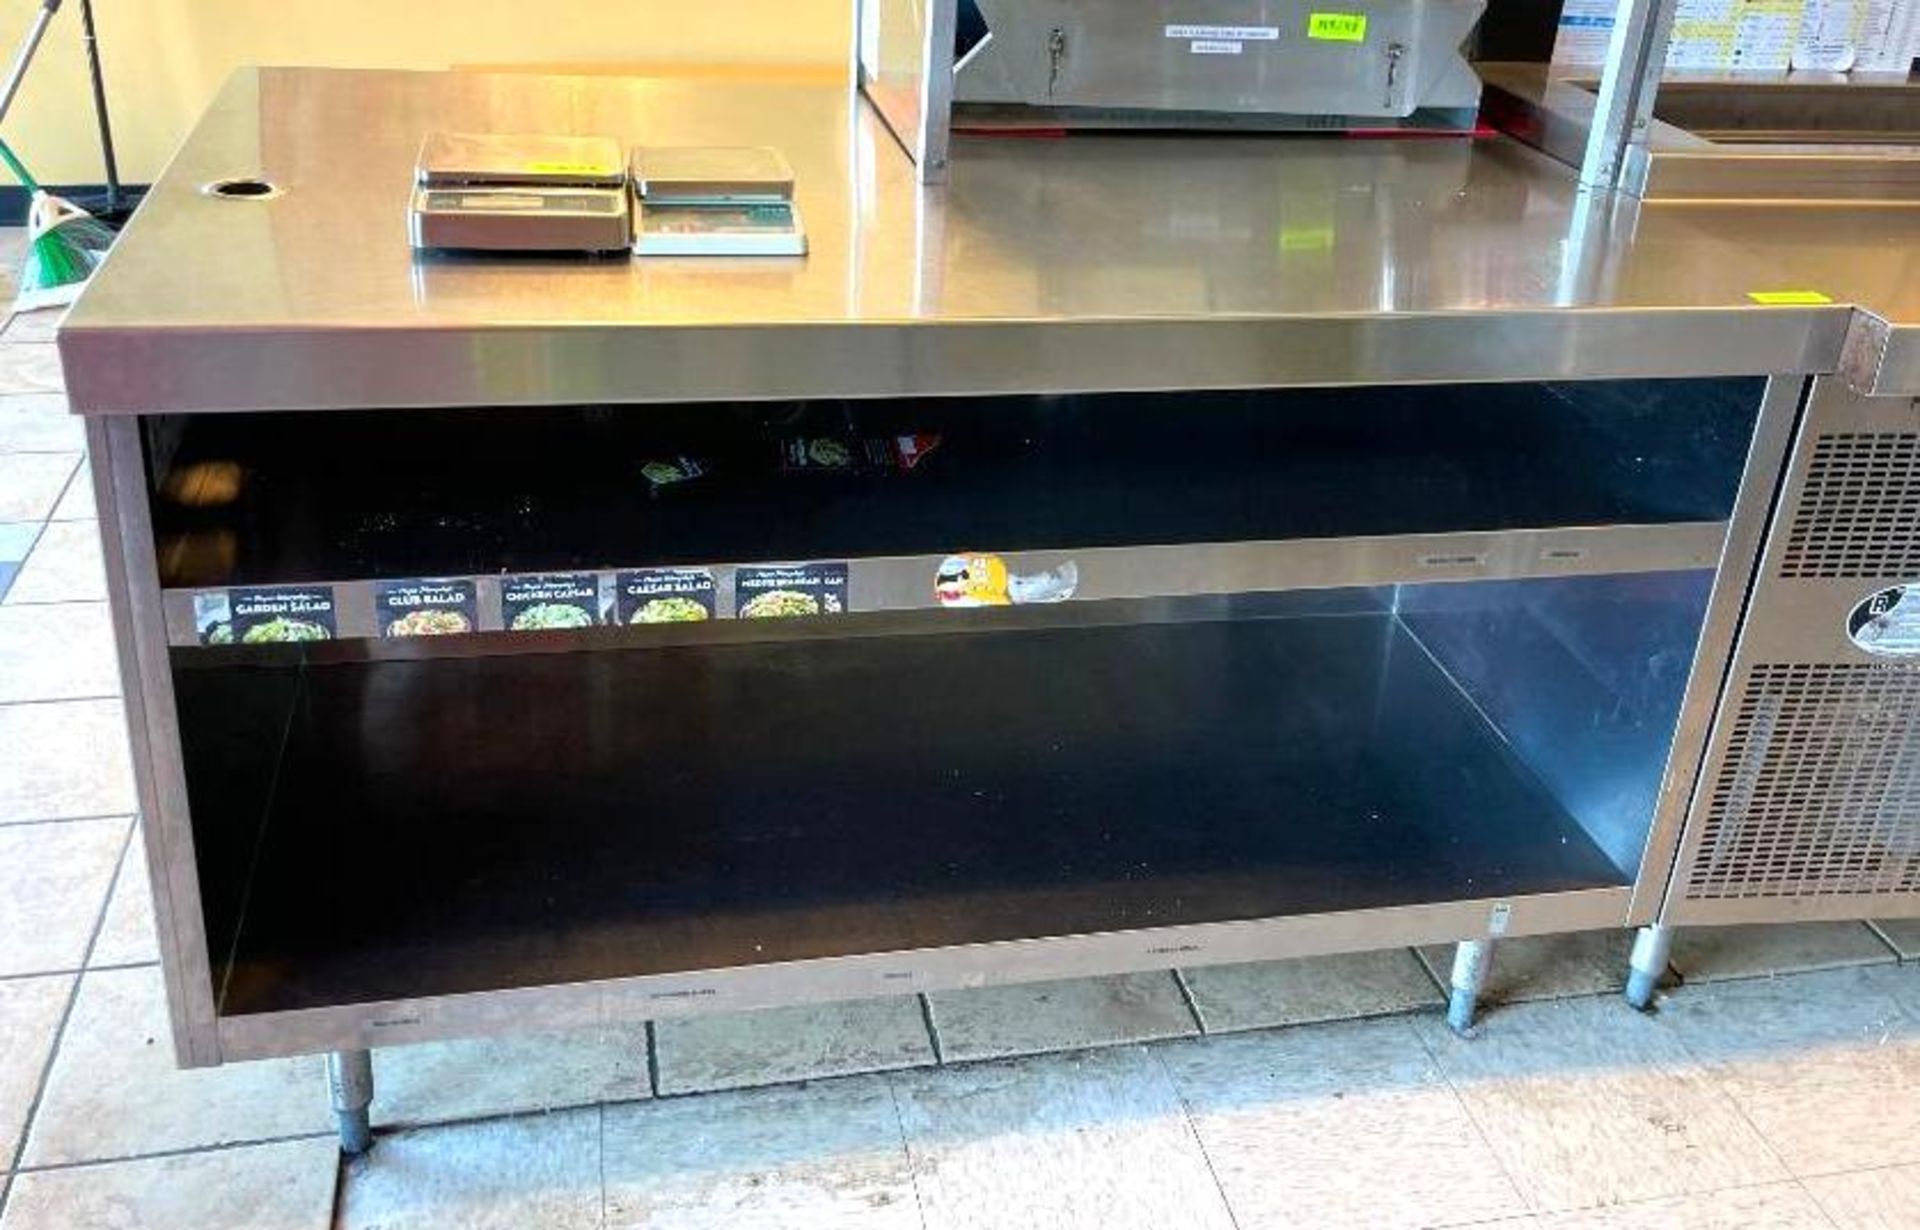 DESCRIPTION: STAINLESS STEEL COUNTER WITH UNDER STORAGE LOCATION: 901 FM 544 SUITE 200 WYLIE, TX 750